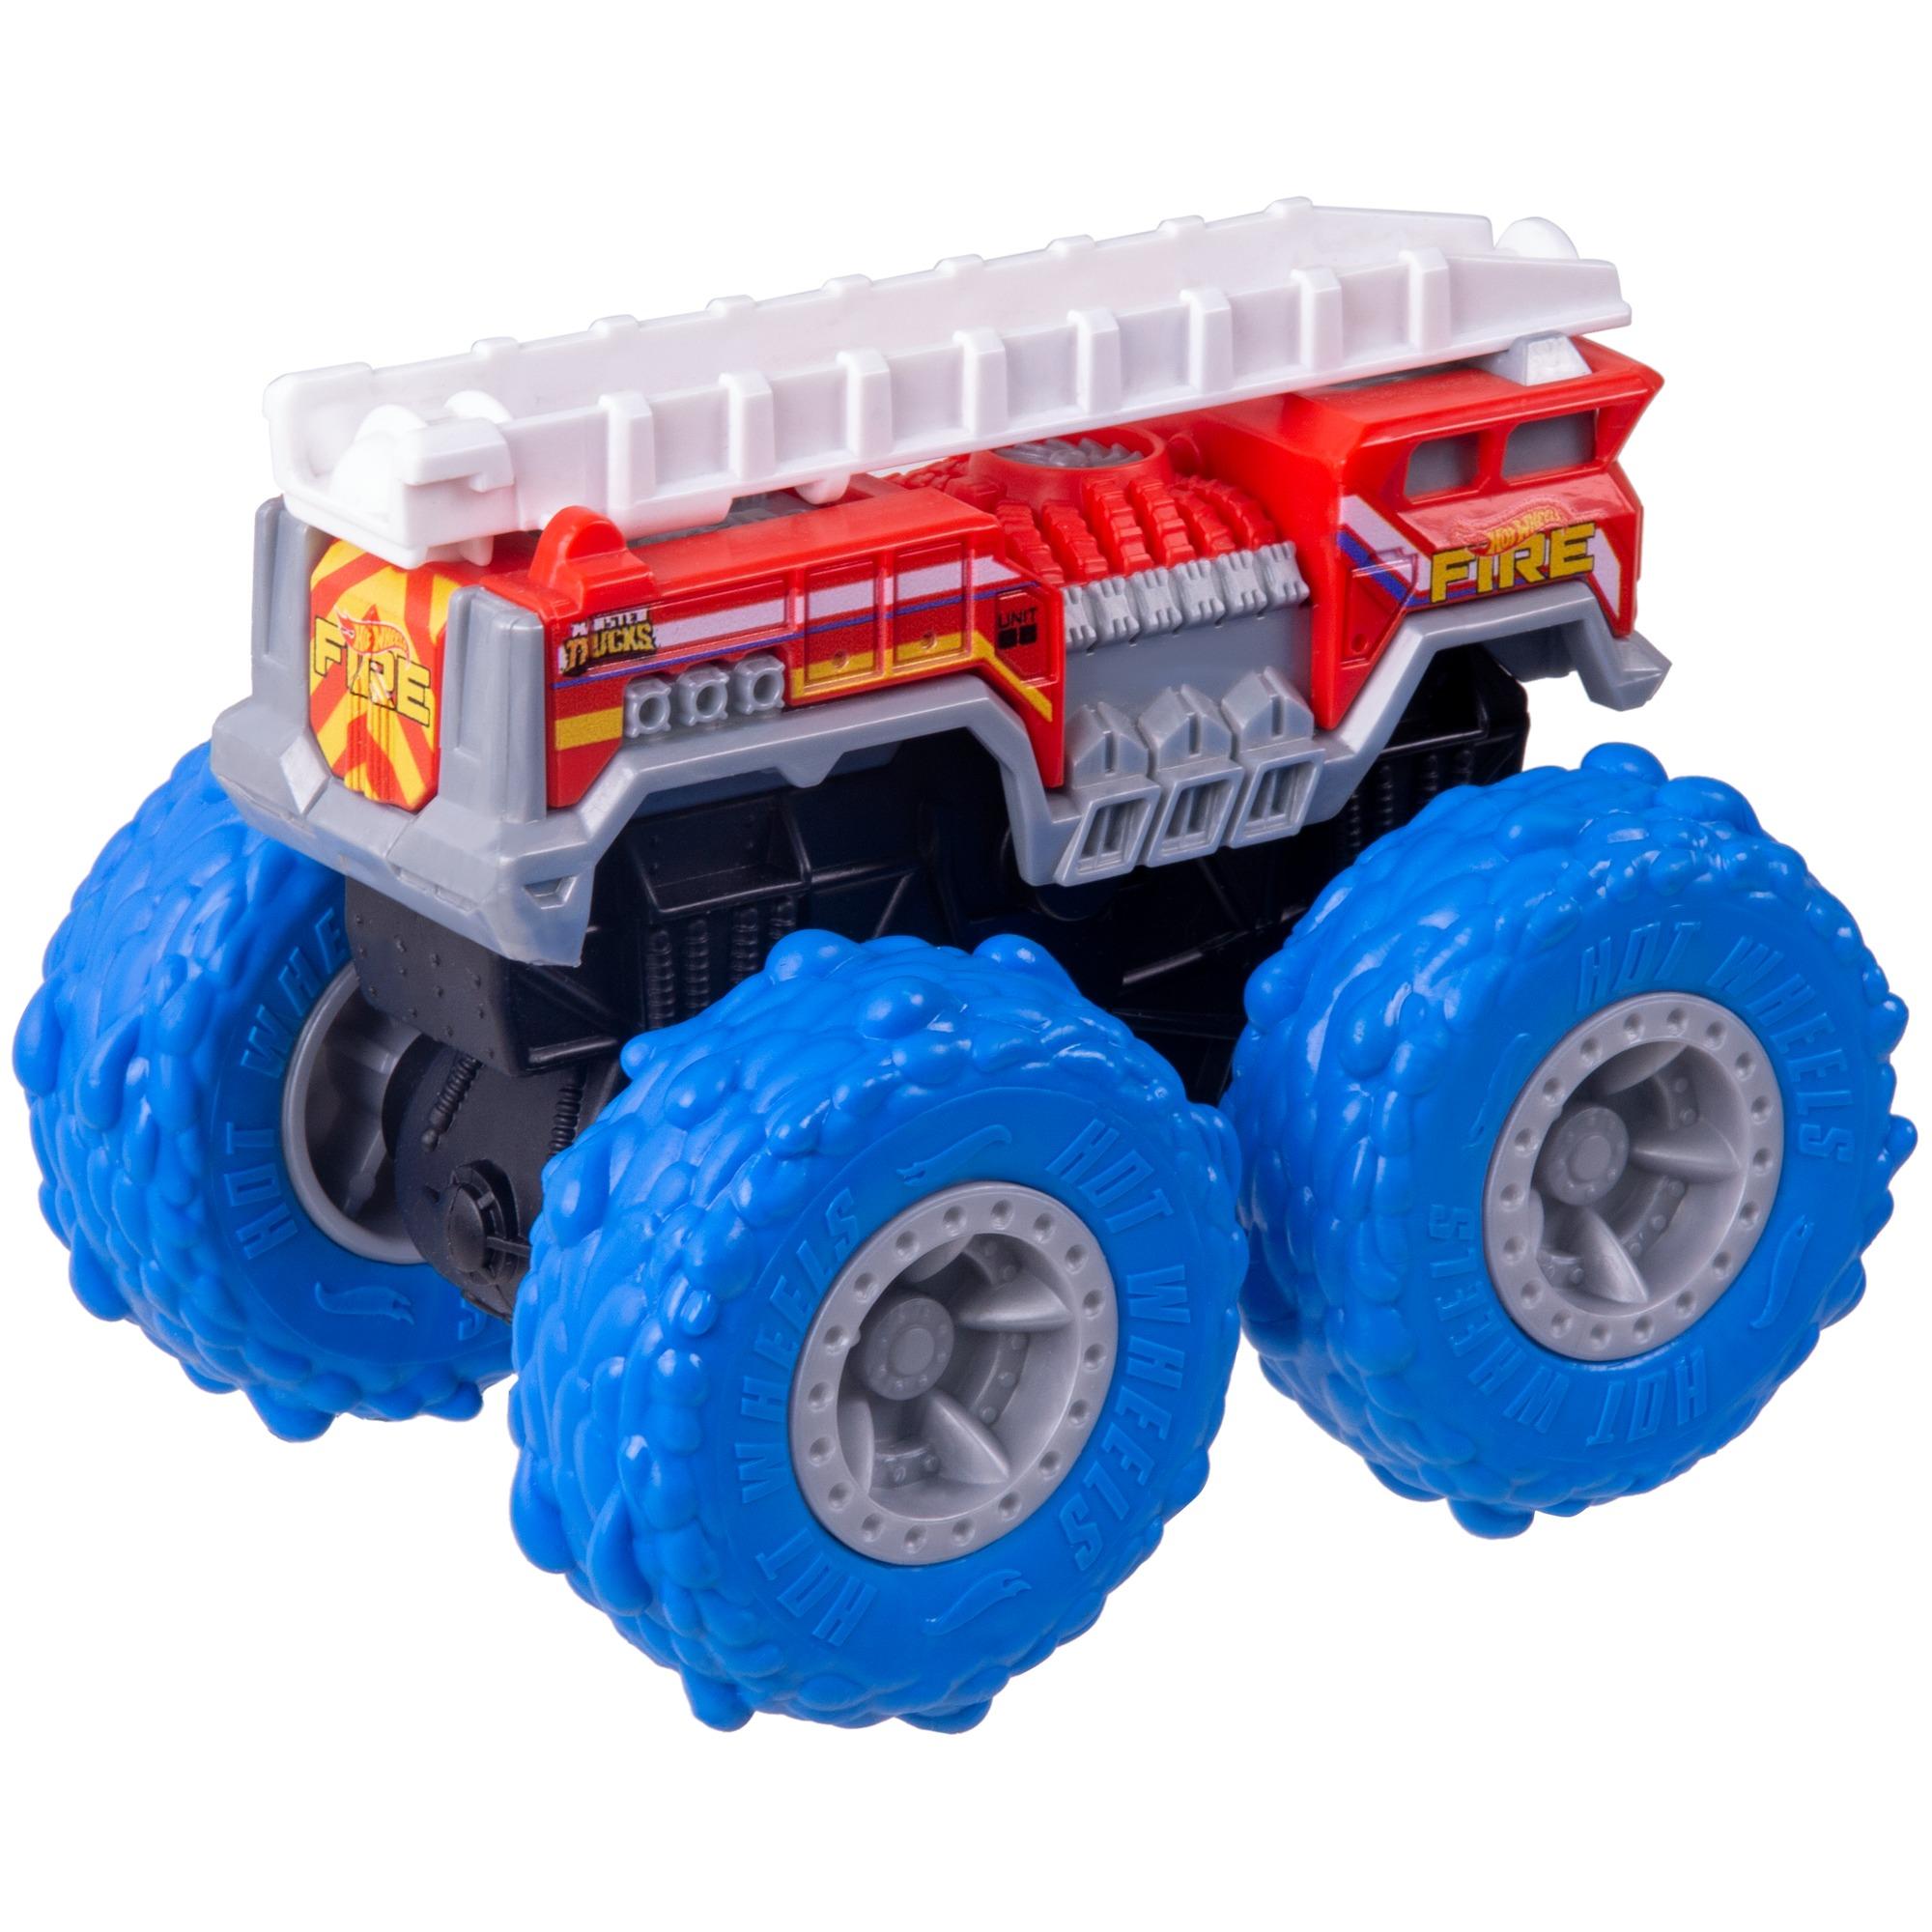 Monster Trucks By Hot Wheels 1:43 Scale Vehicle (Styles May Vary) - image 6 of 9